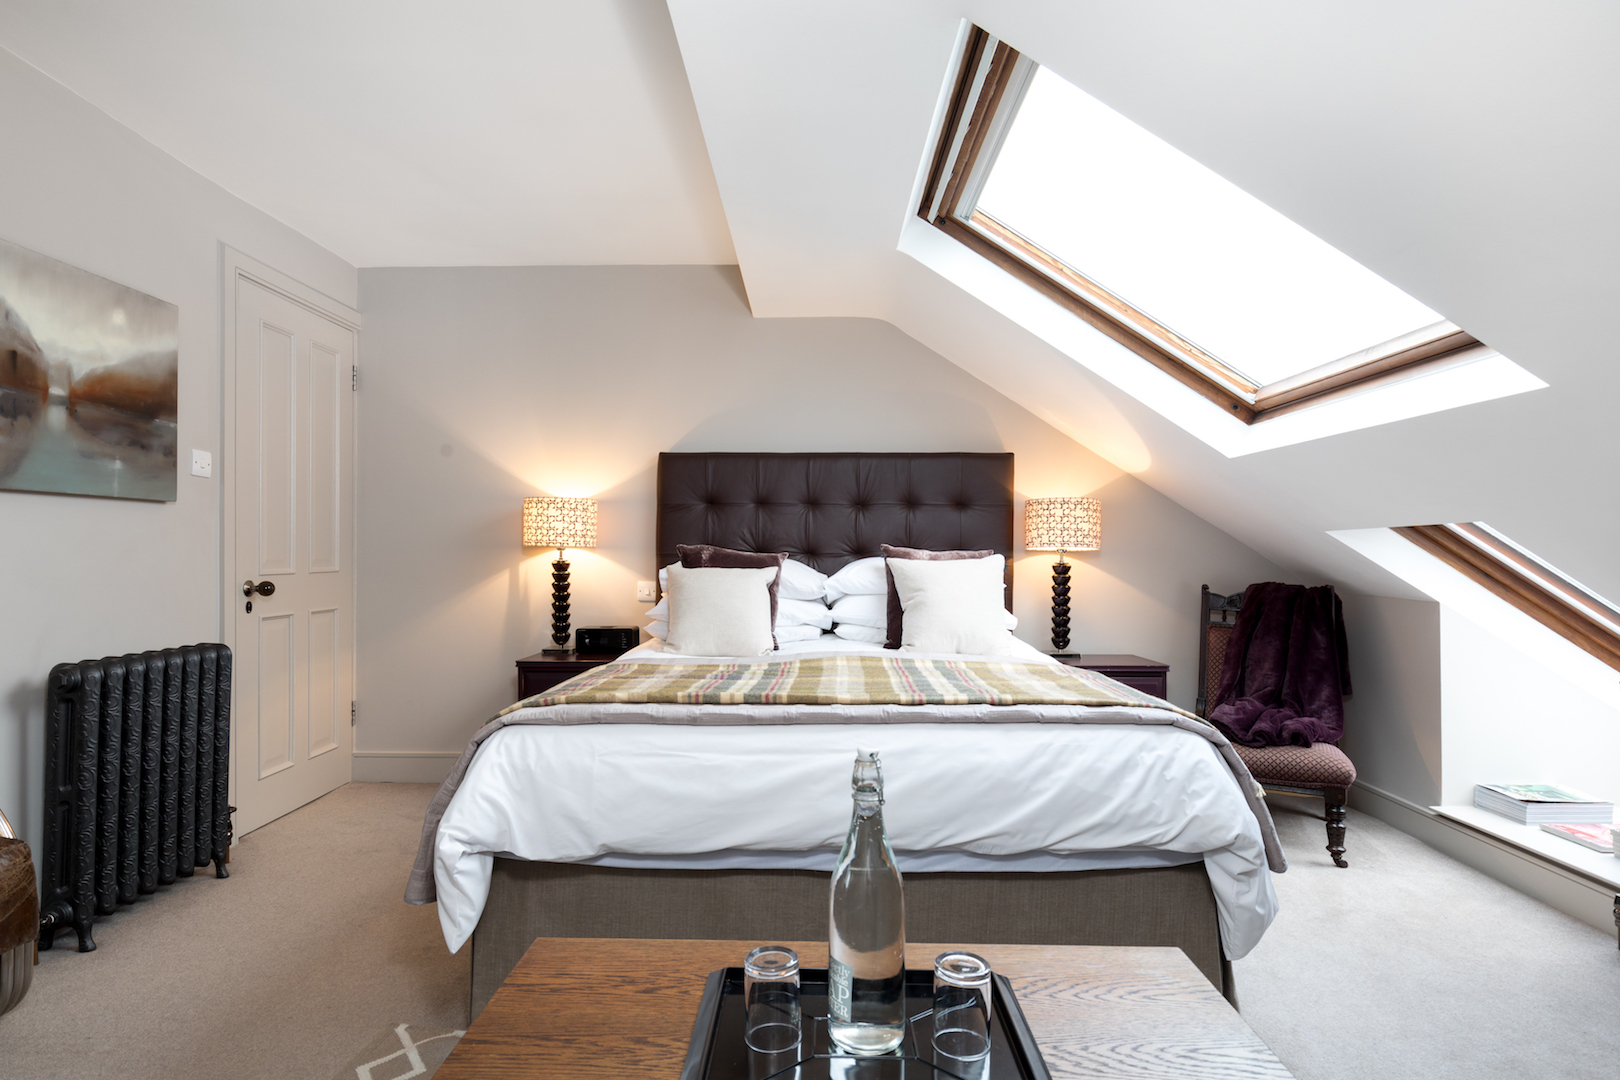 Top 10 bed and breakfast in london